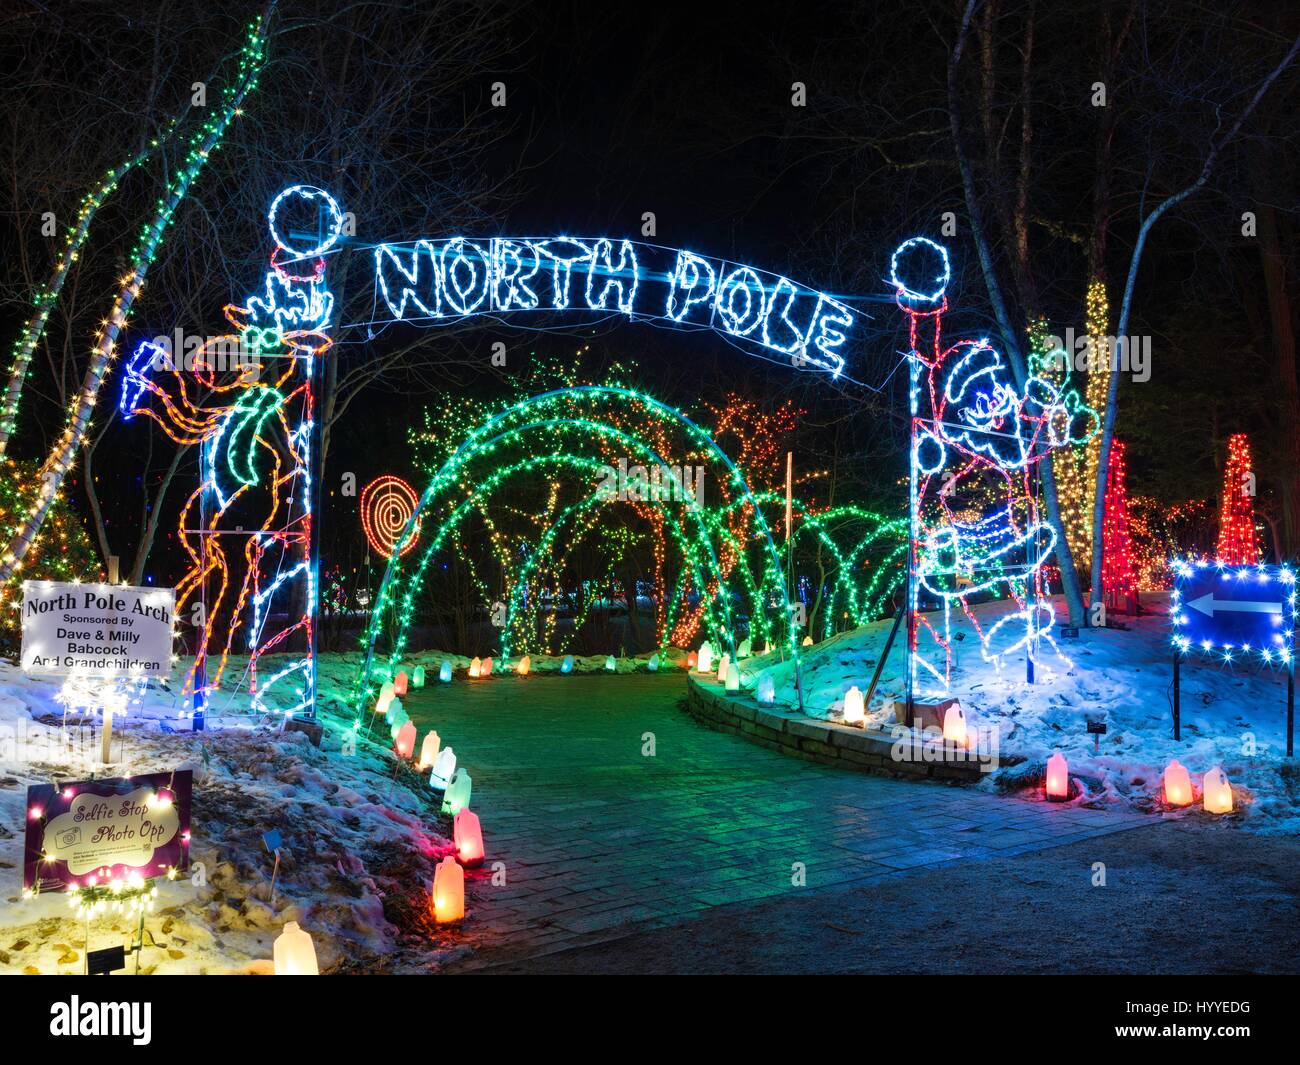 Holiday light show at Janesville Rotary Gardens, Janesville, Wisconsin